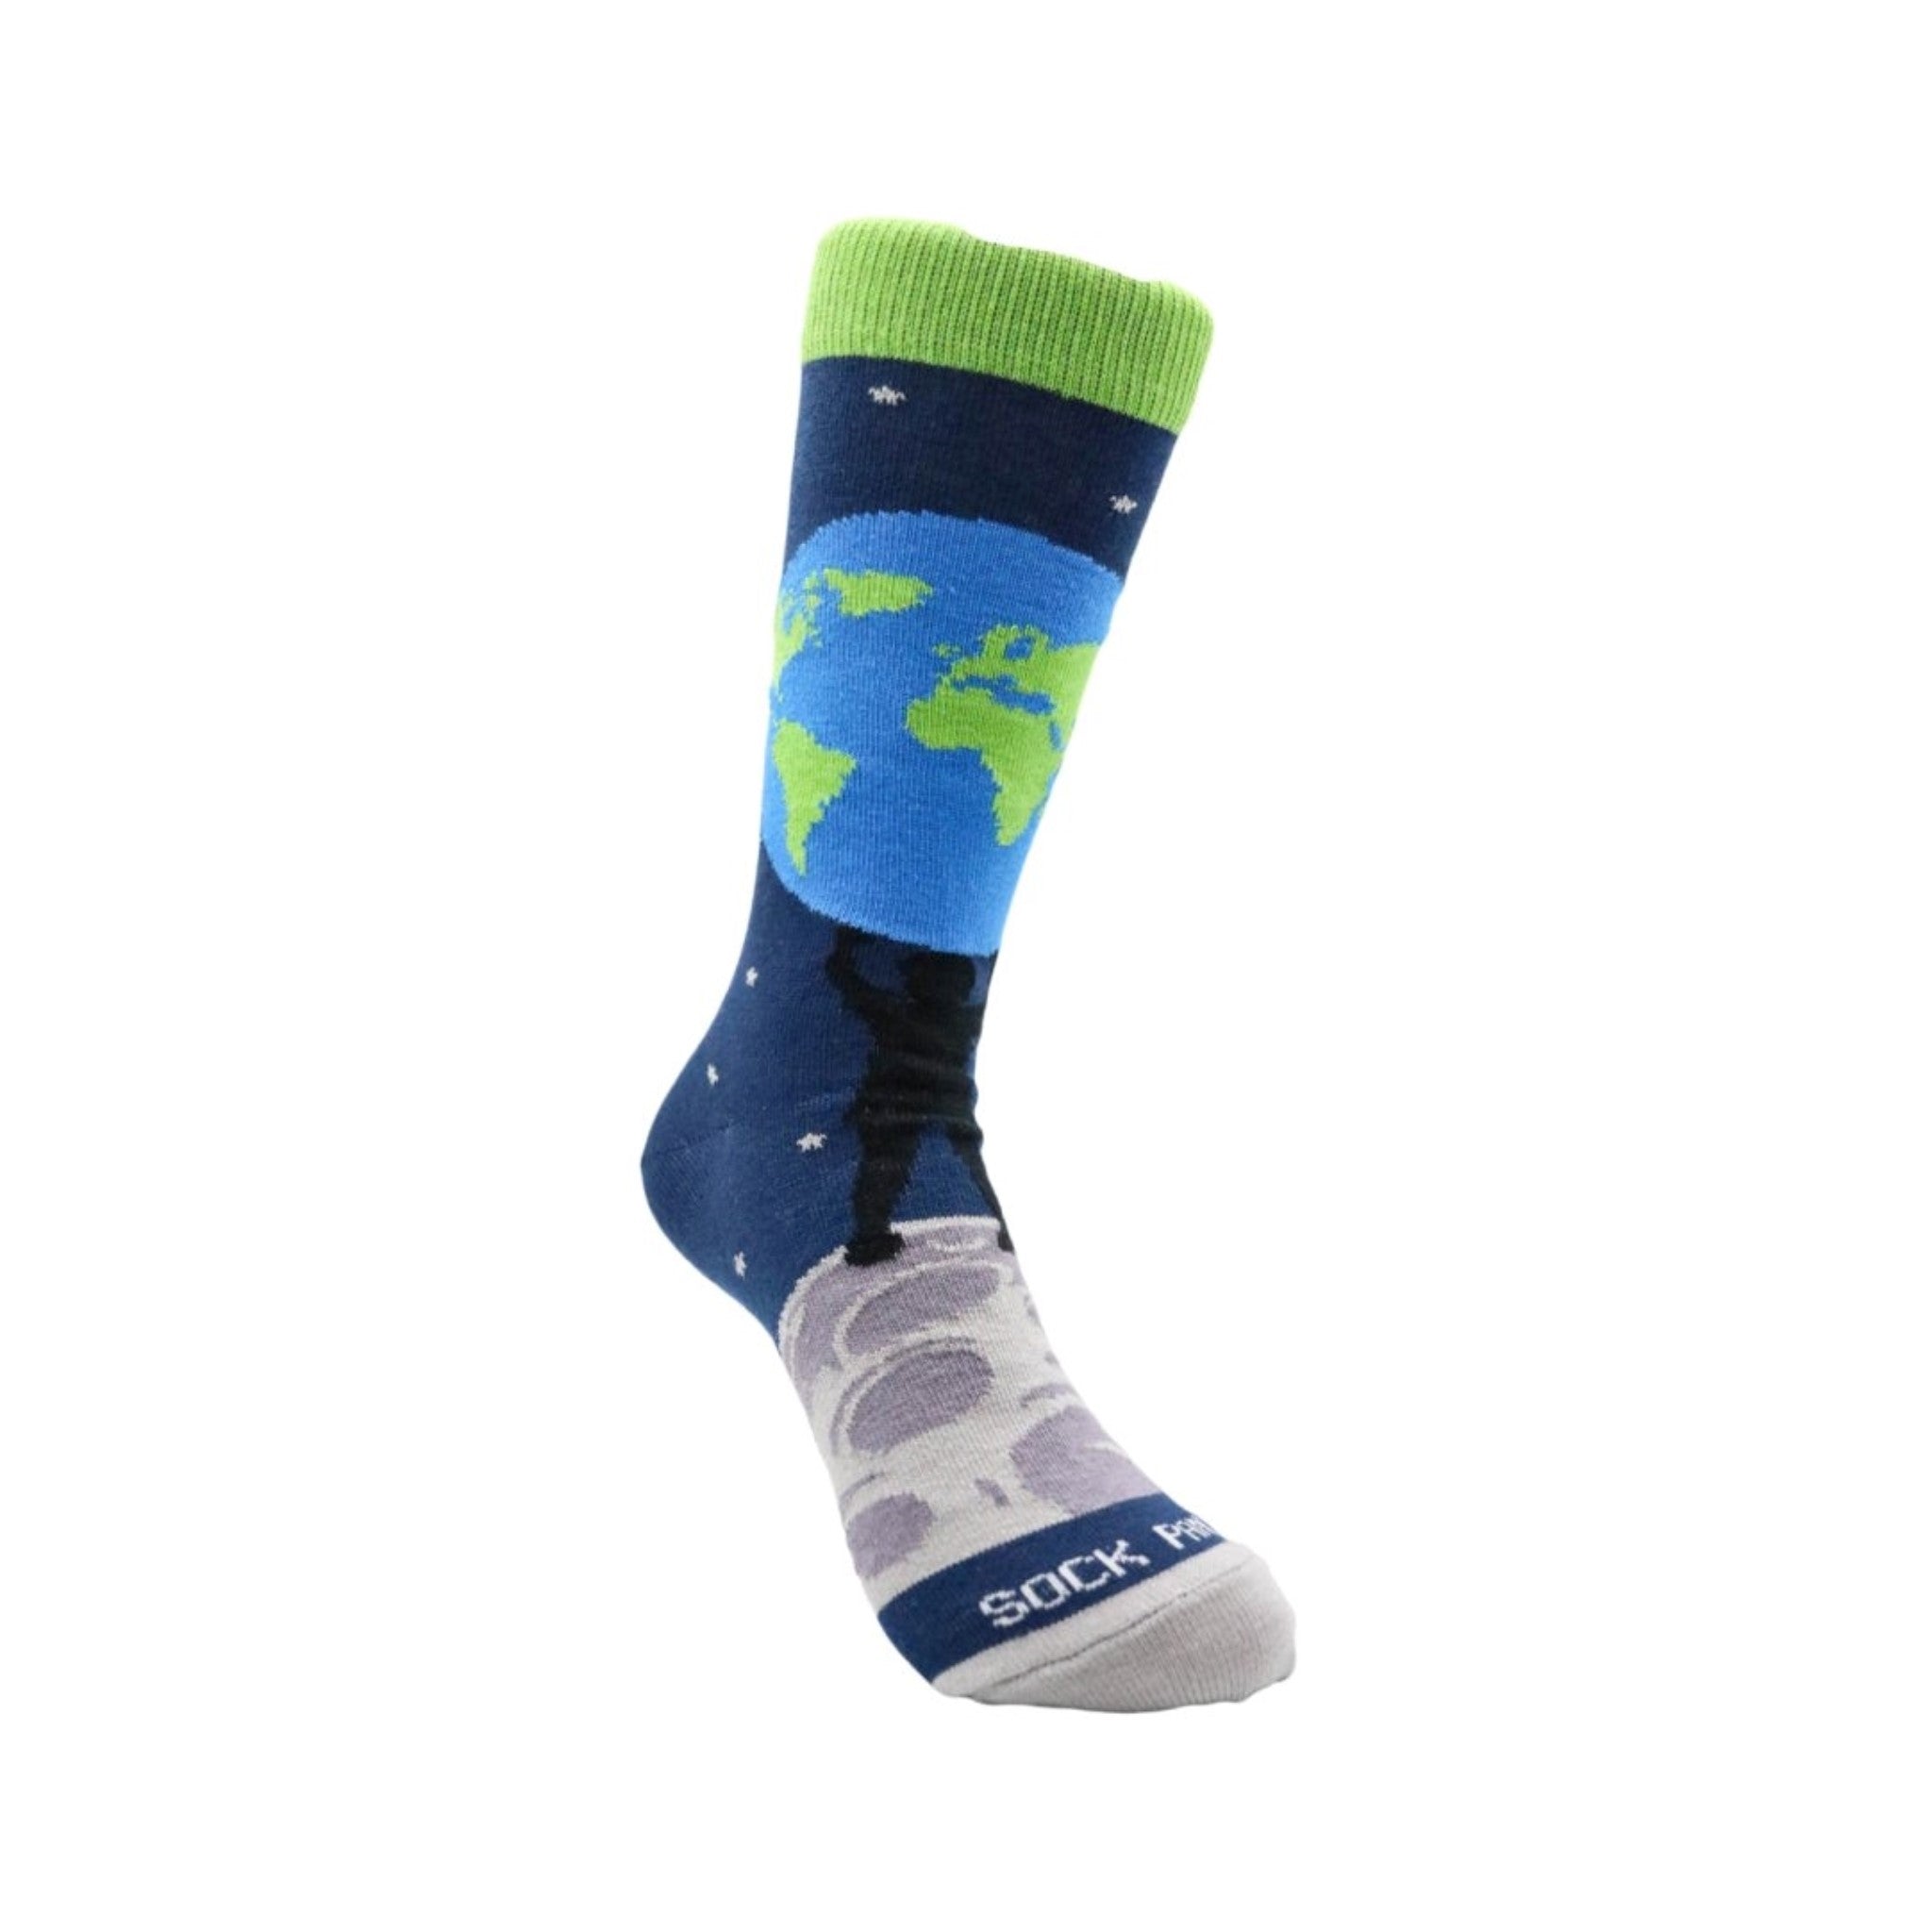 The World Is In Your Hands Sock (or on your feet) - (Set of 2)